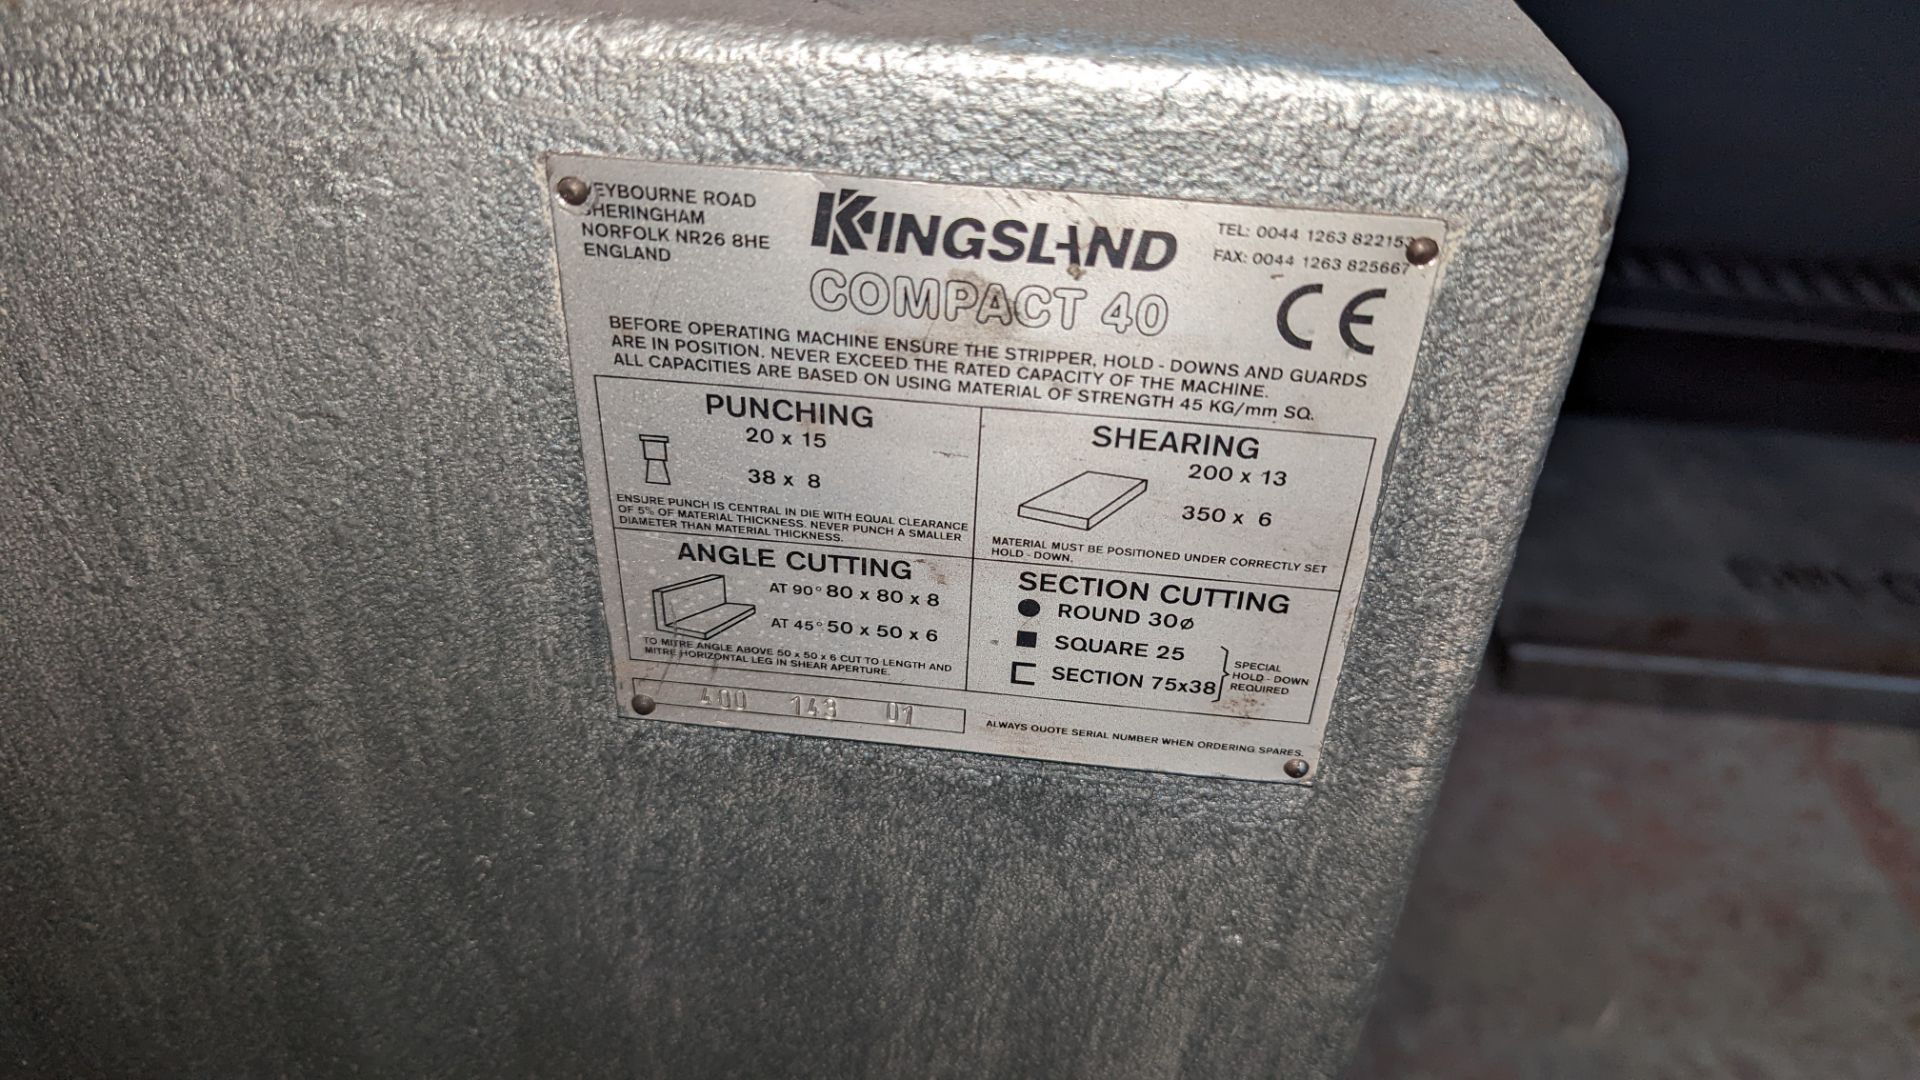 Kingsland Compact 40 steelworker (punching, shearing, angle cutting & section cutting) - Image 13 of 17